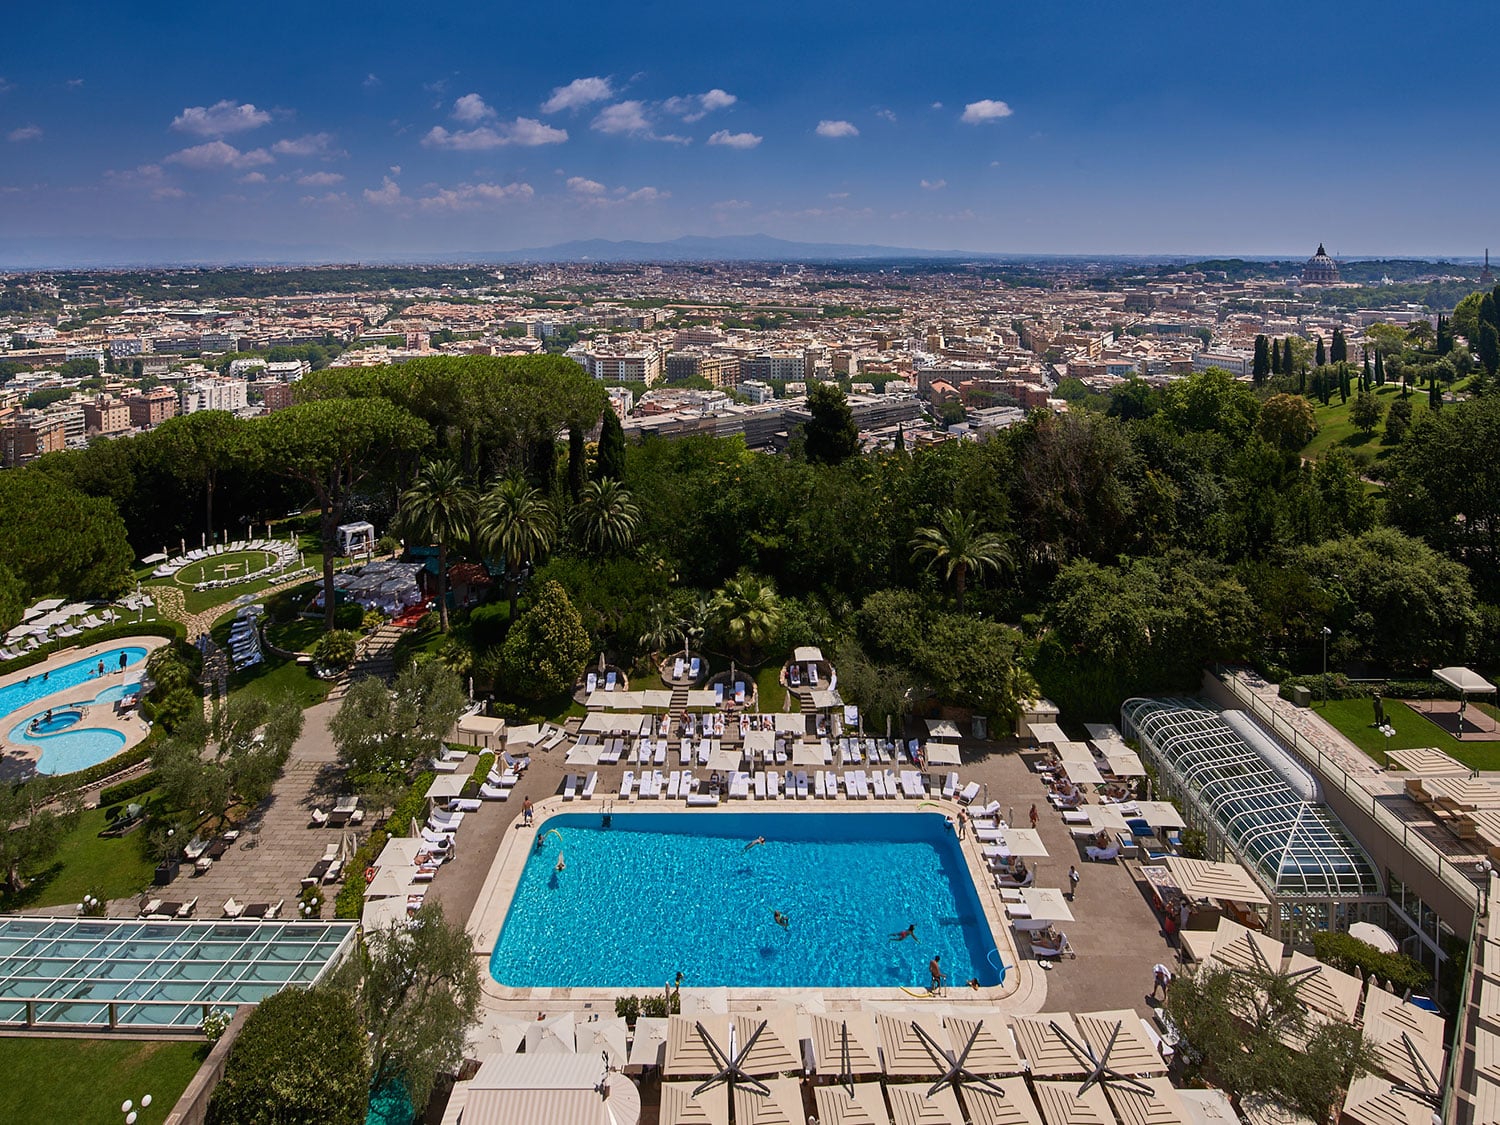 An aerial view of the property and surroundings of Rome Cavalieri, A Waldorf Astoria Hotel, in Italy.